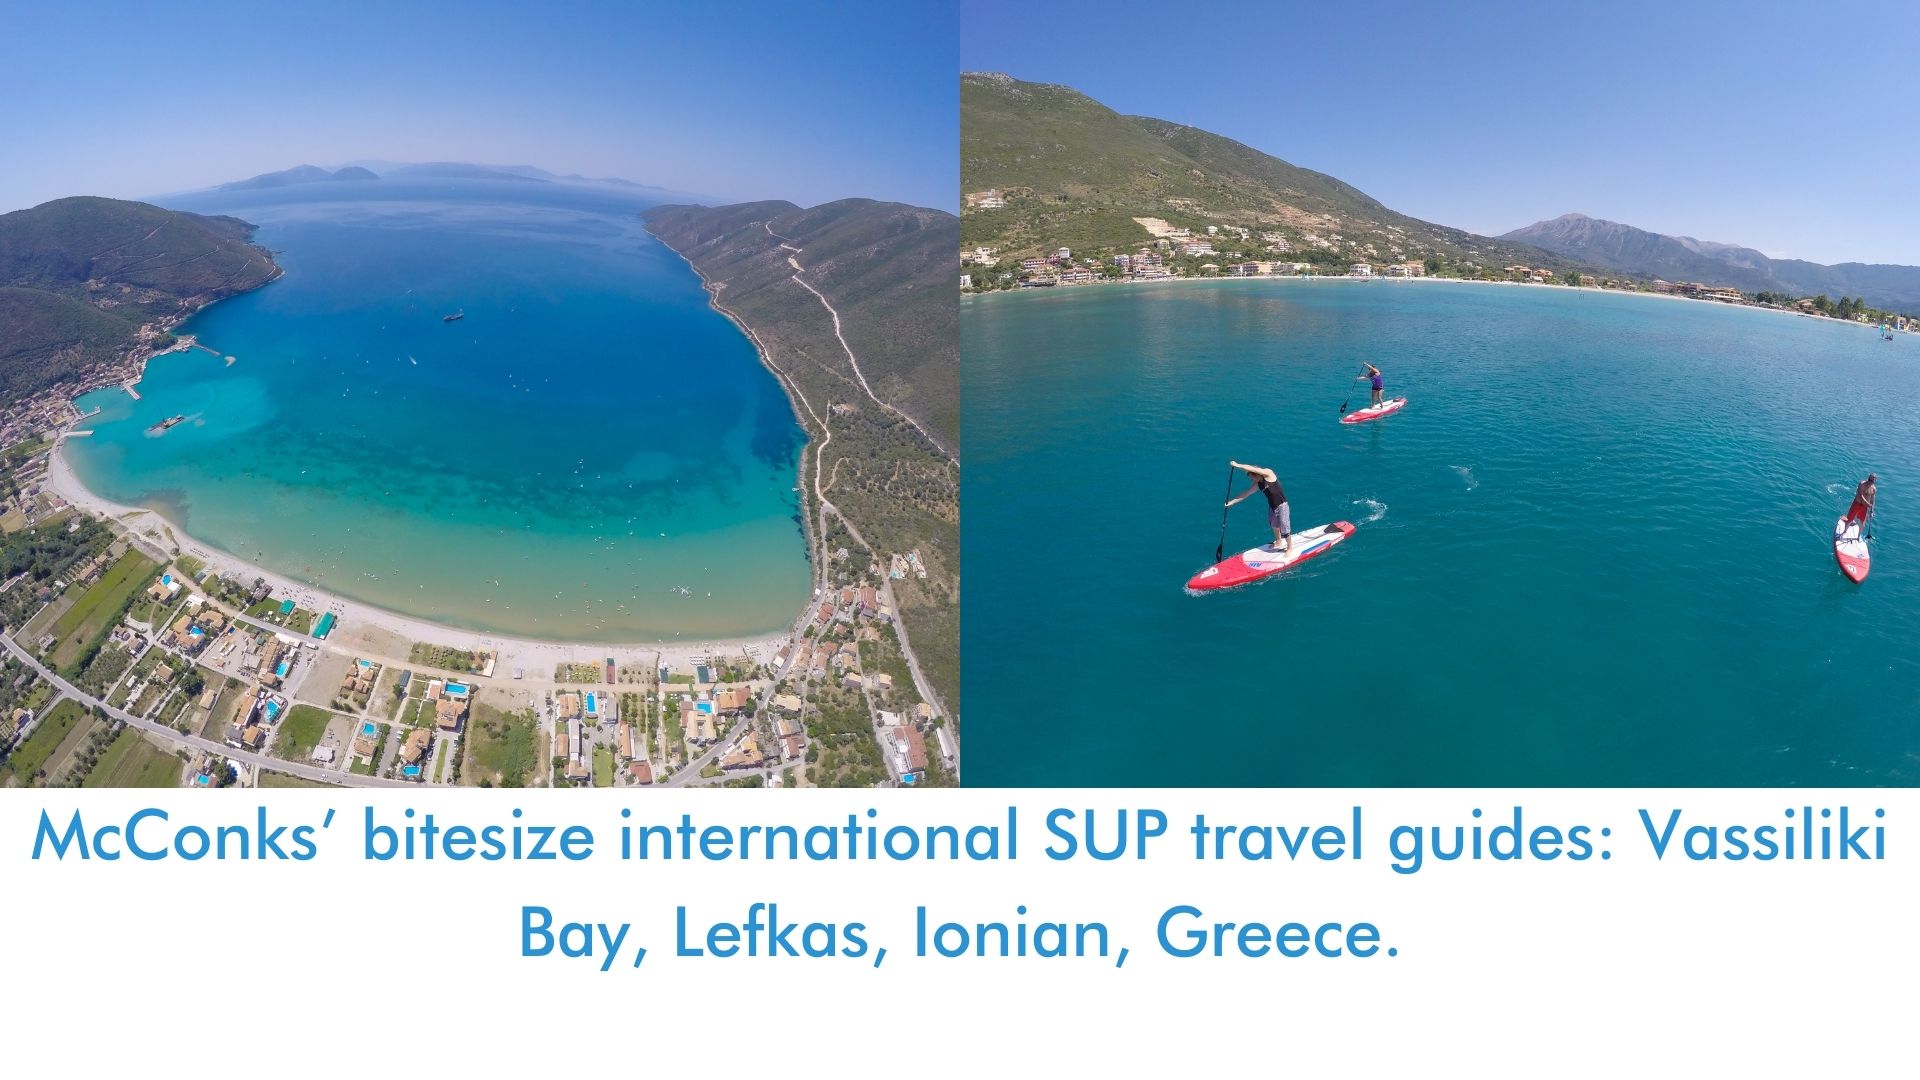 You are currently viewing McConks’ bitesize international SUP travel guides: Vassiliki Bay, Lefkas, Ionian, Greece.